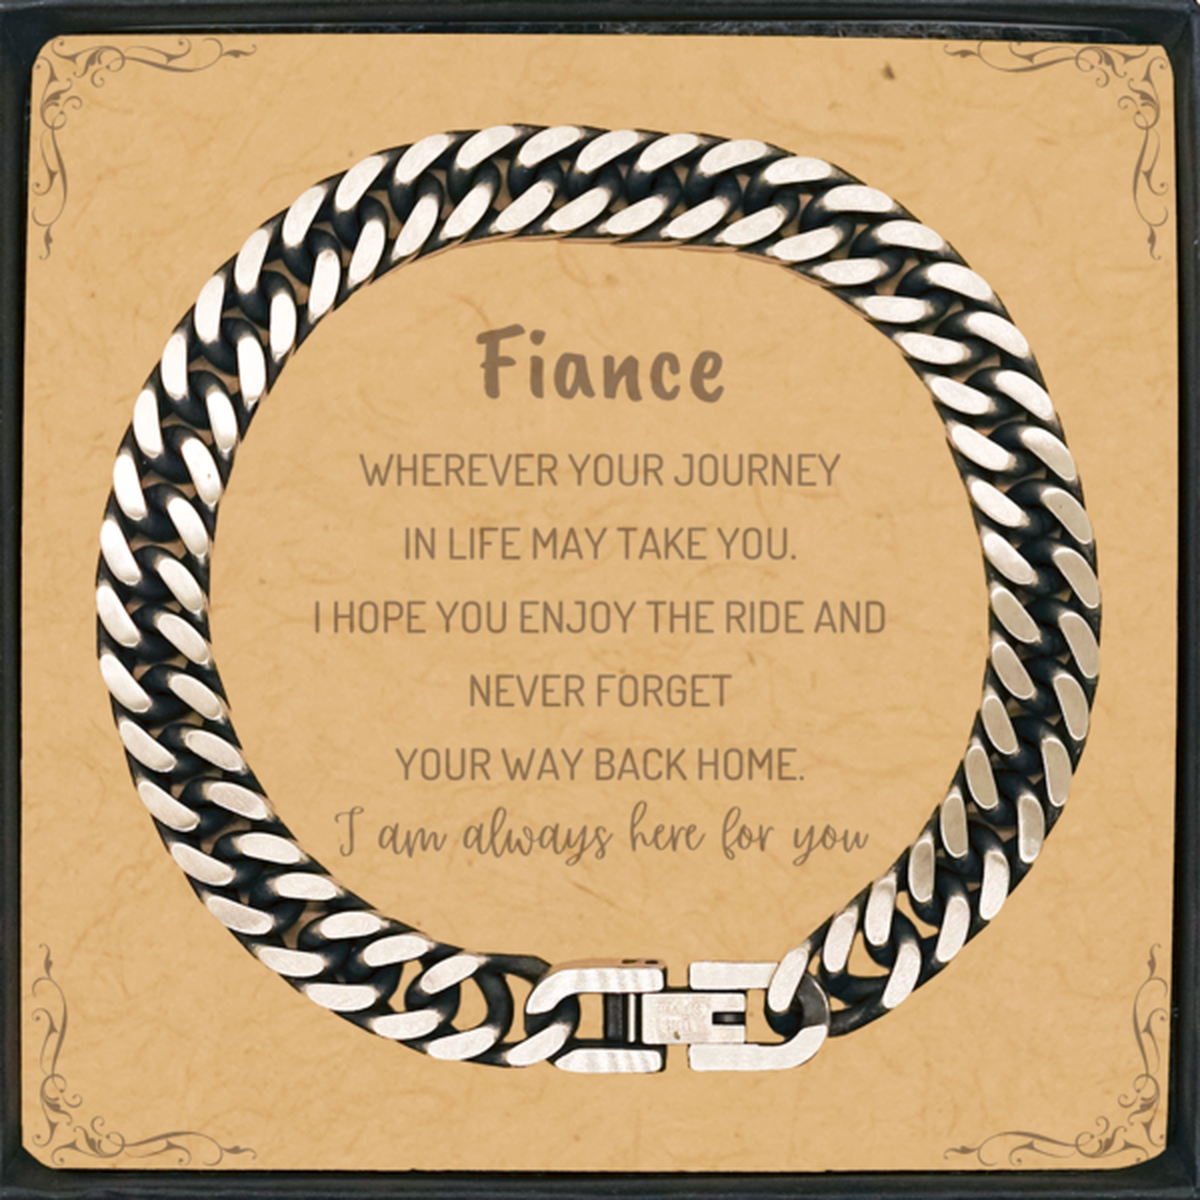 Fiance wherever your journey in life may take you, I am always here for you Fiance Cuban Link Chain Bracelet, Awesome Christmas Gifts For Fiance Message Card, Fiance Birthday Gifts for Men Women Family Loved One